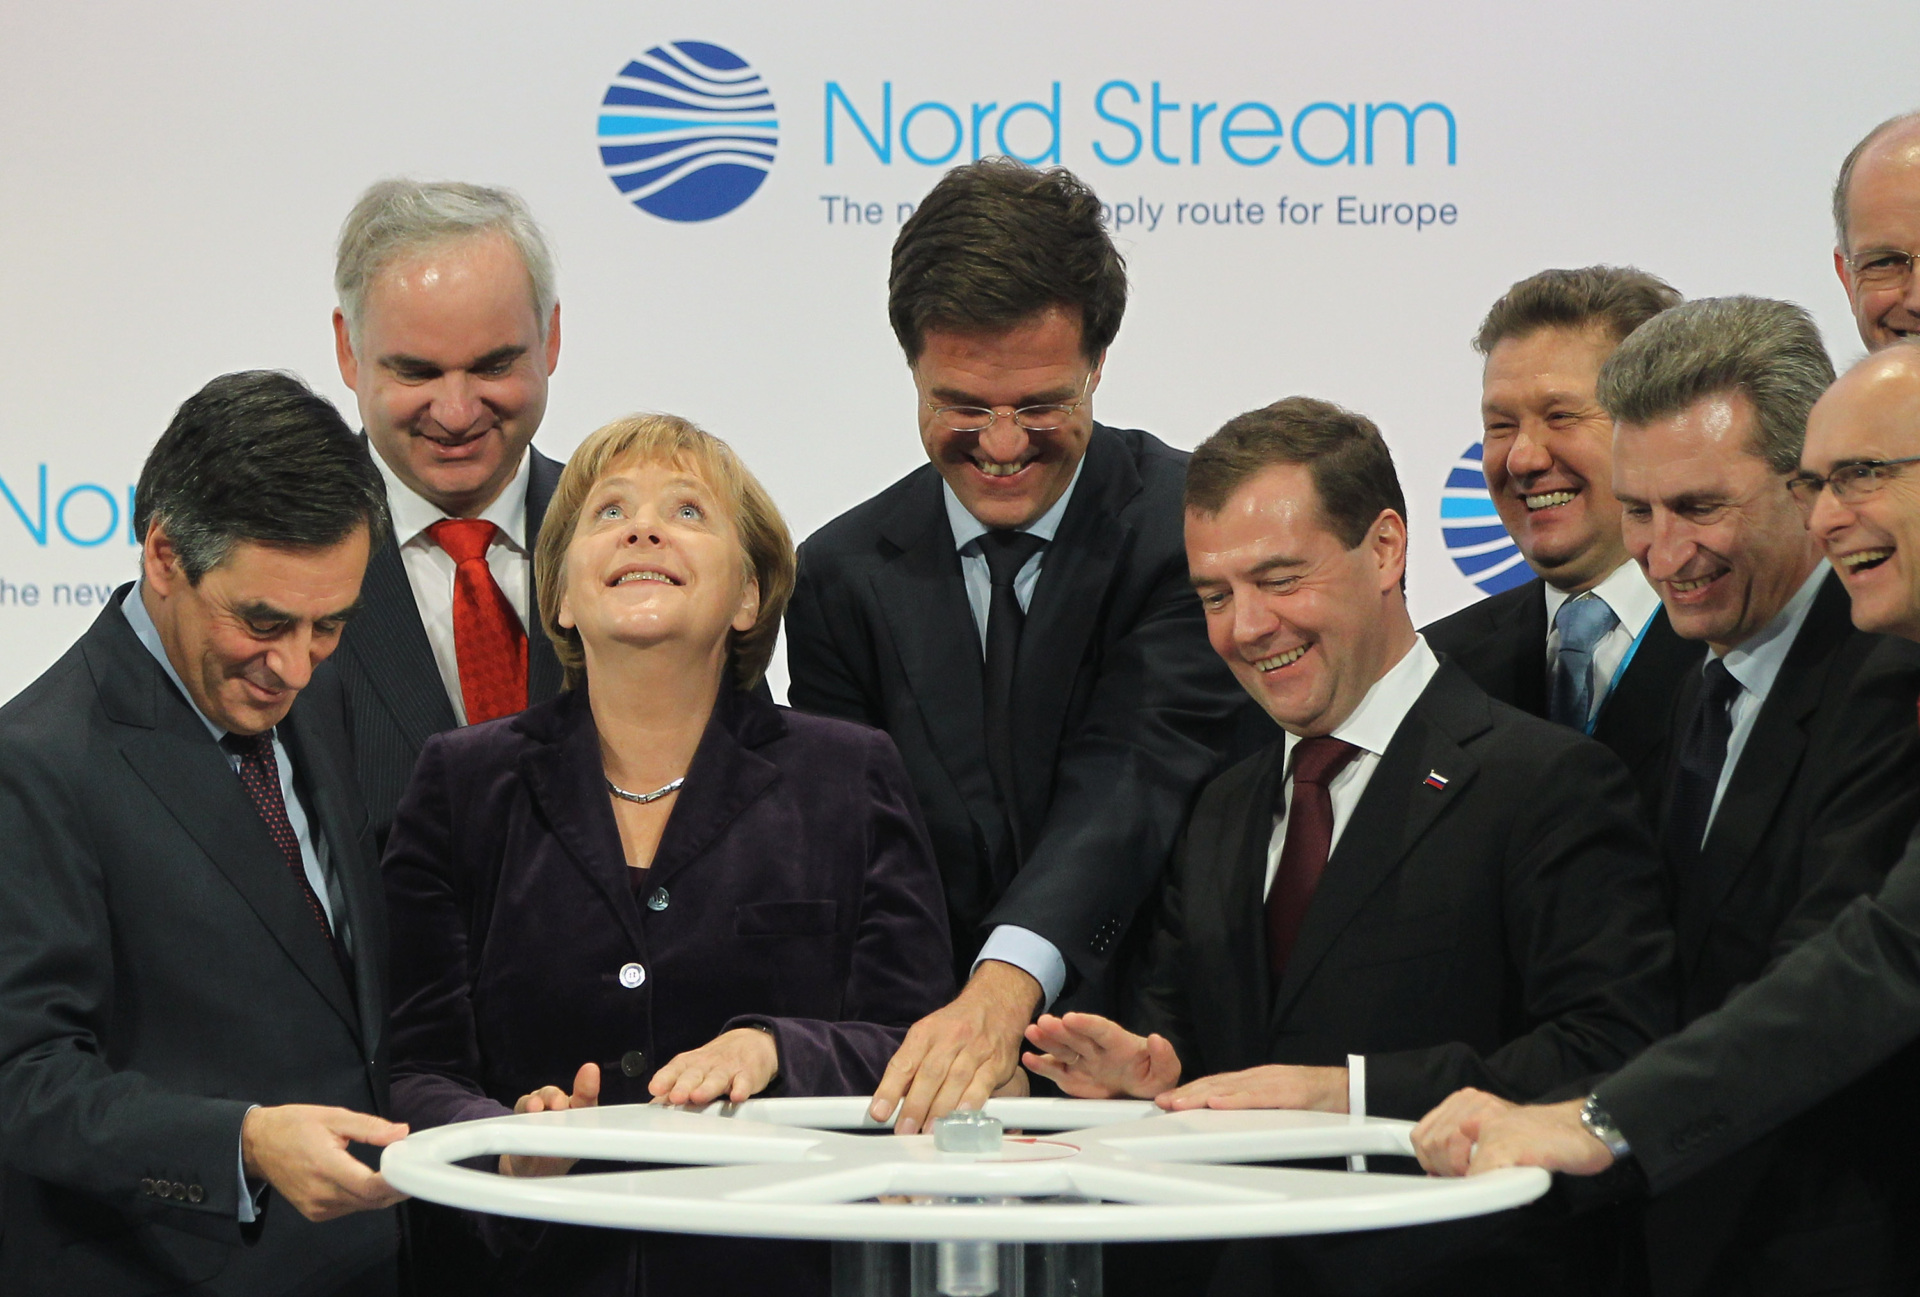 LUBMIN, GERMANY - NOVEMBER 08: (From L to R, first row) French Prime Minister Francois Fillon, German Chancellor Angela Merkel, Dutch Prime Minister Mark Rutte, Russian President Dmitry Medvedev and European Union Energy Commissioner Guenther Oettinger turn a wheel to symbolically start the flow of gas through the Nord Stream Baltic Sea gas pipeline at a cemerony on November 8, 2011 in Lubmin, Germany. The Nord Stream pipeline runs through the Baltic Sea and will supply Europe with natural gas from Russia. (Photo by Sean Gallup/Getty Images)